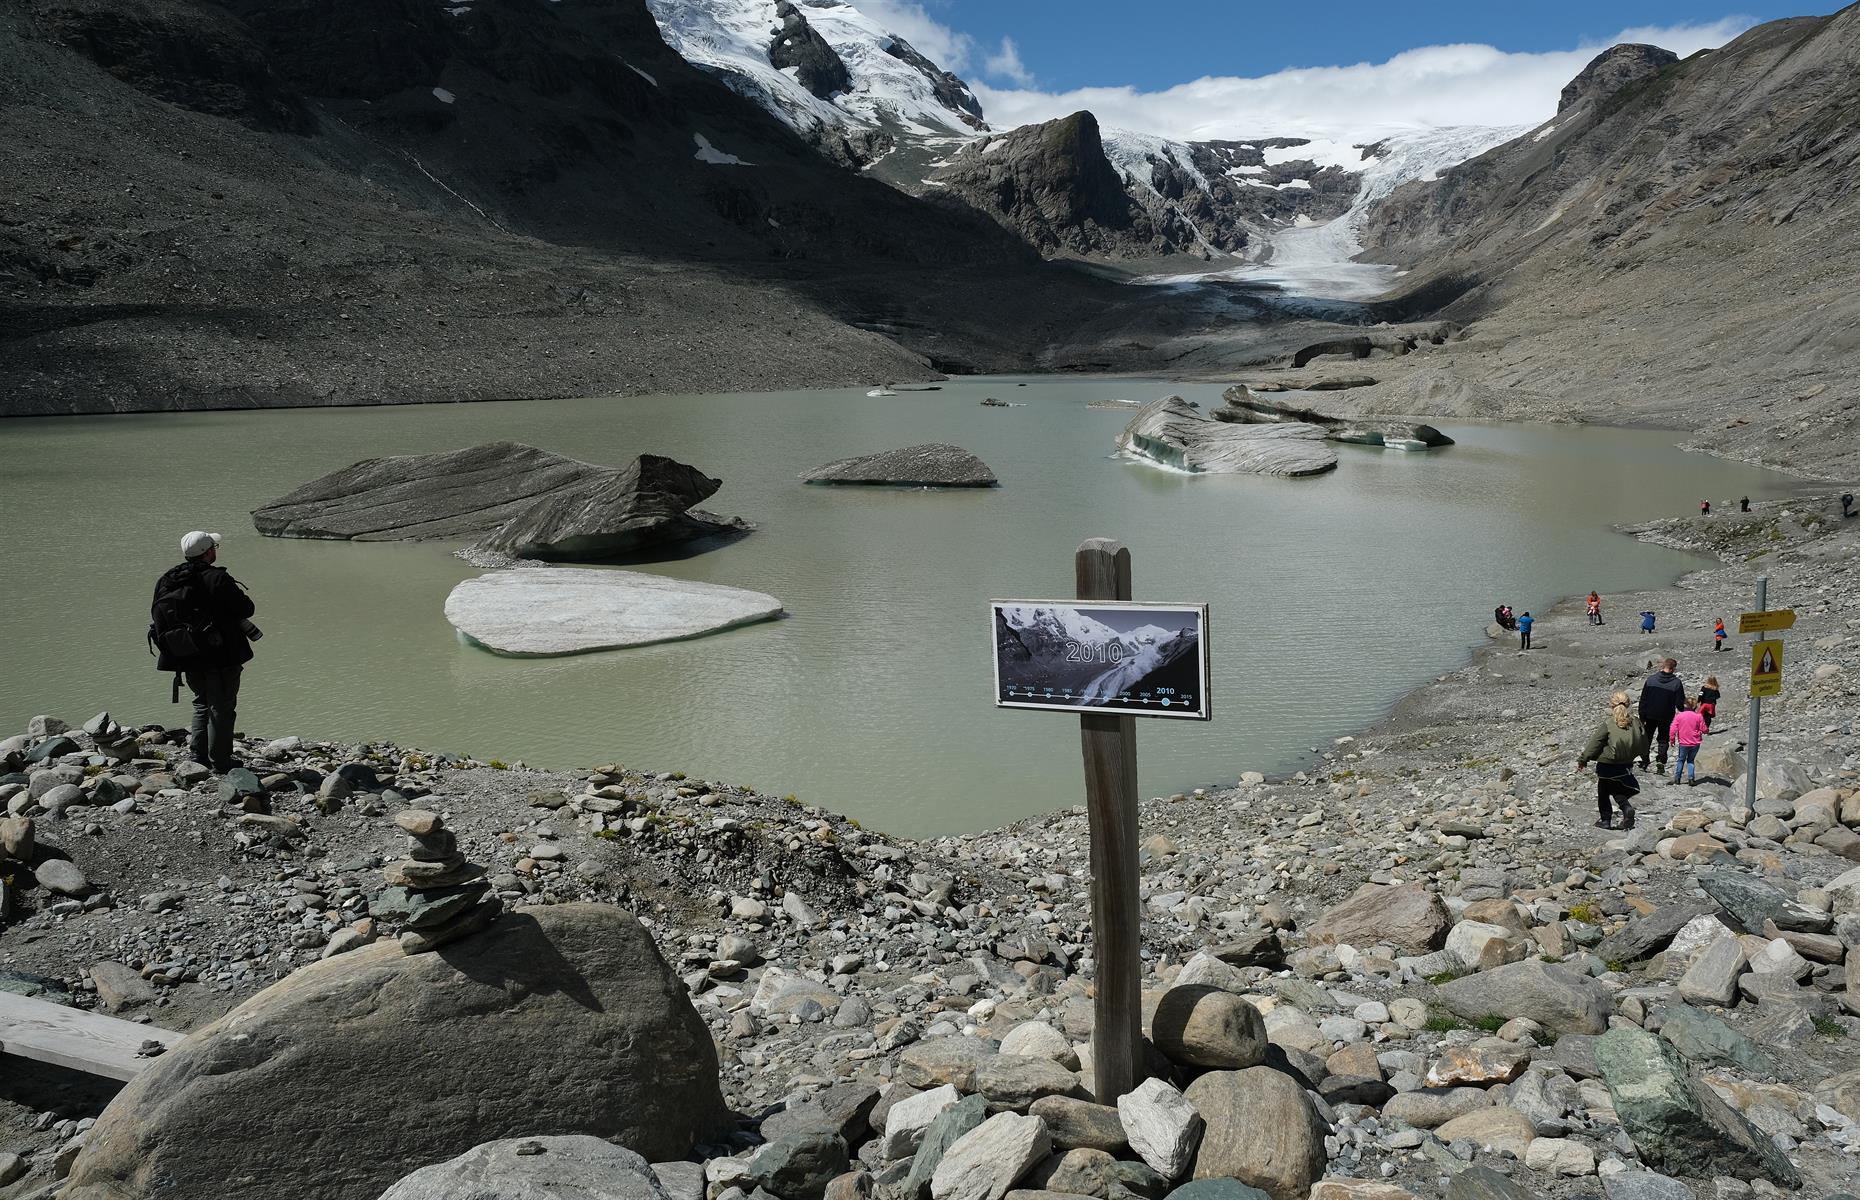 <p>One of Europe's rapidly retreating glaciers is the Pasterze Glacier, Austria’s largest, which has lost half its volume since the 1850s. This image shows a sign where the Pasterze Glacier reached in 2005. Along with others, it has been receding due to higher summer temperatures and lower winter snowfall. Switzerland held a 'mourning ceremony' on its evaporating Pizol glacier in 2019 – the glacier in the Glarus Alps has lost up to 90% of its volume since 2006.</p>